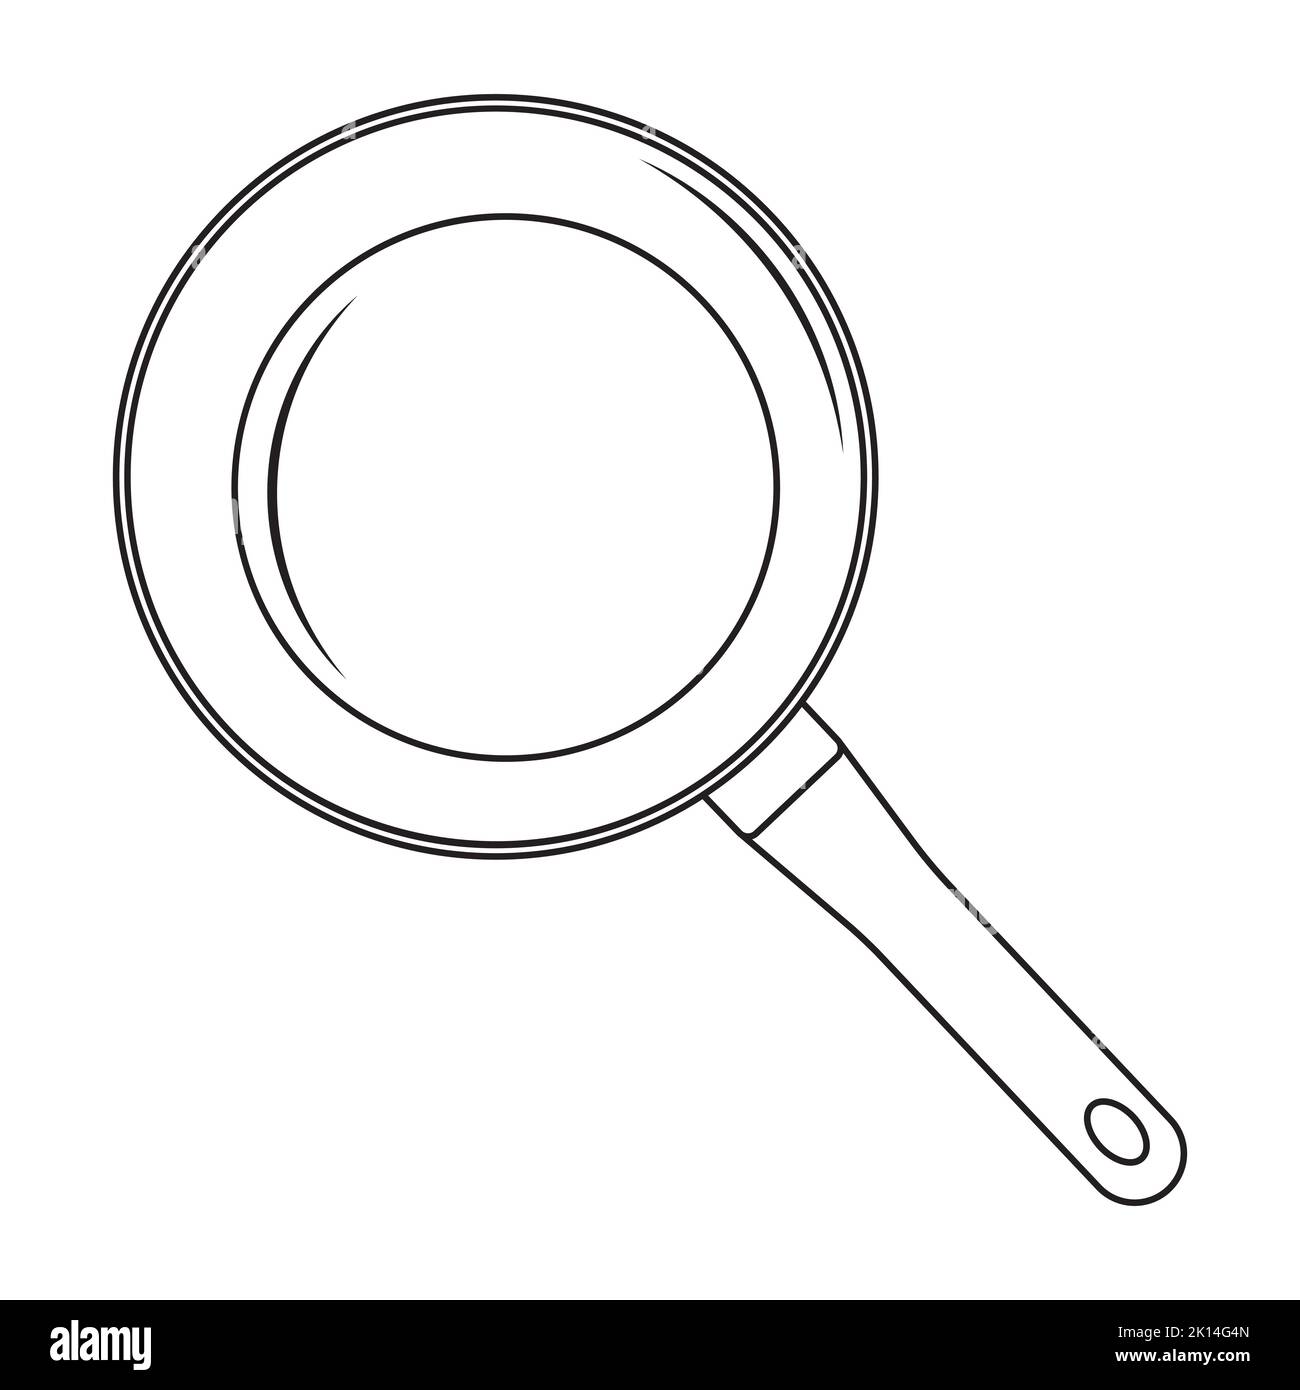 Black insulated frying pan with handle, black contour in doodle style, vector illustration Stock Vector